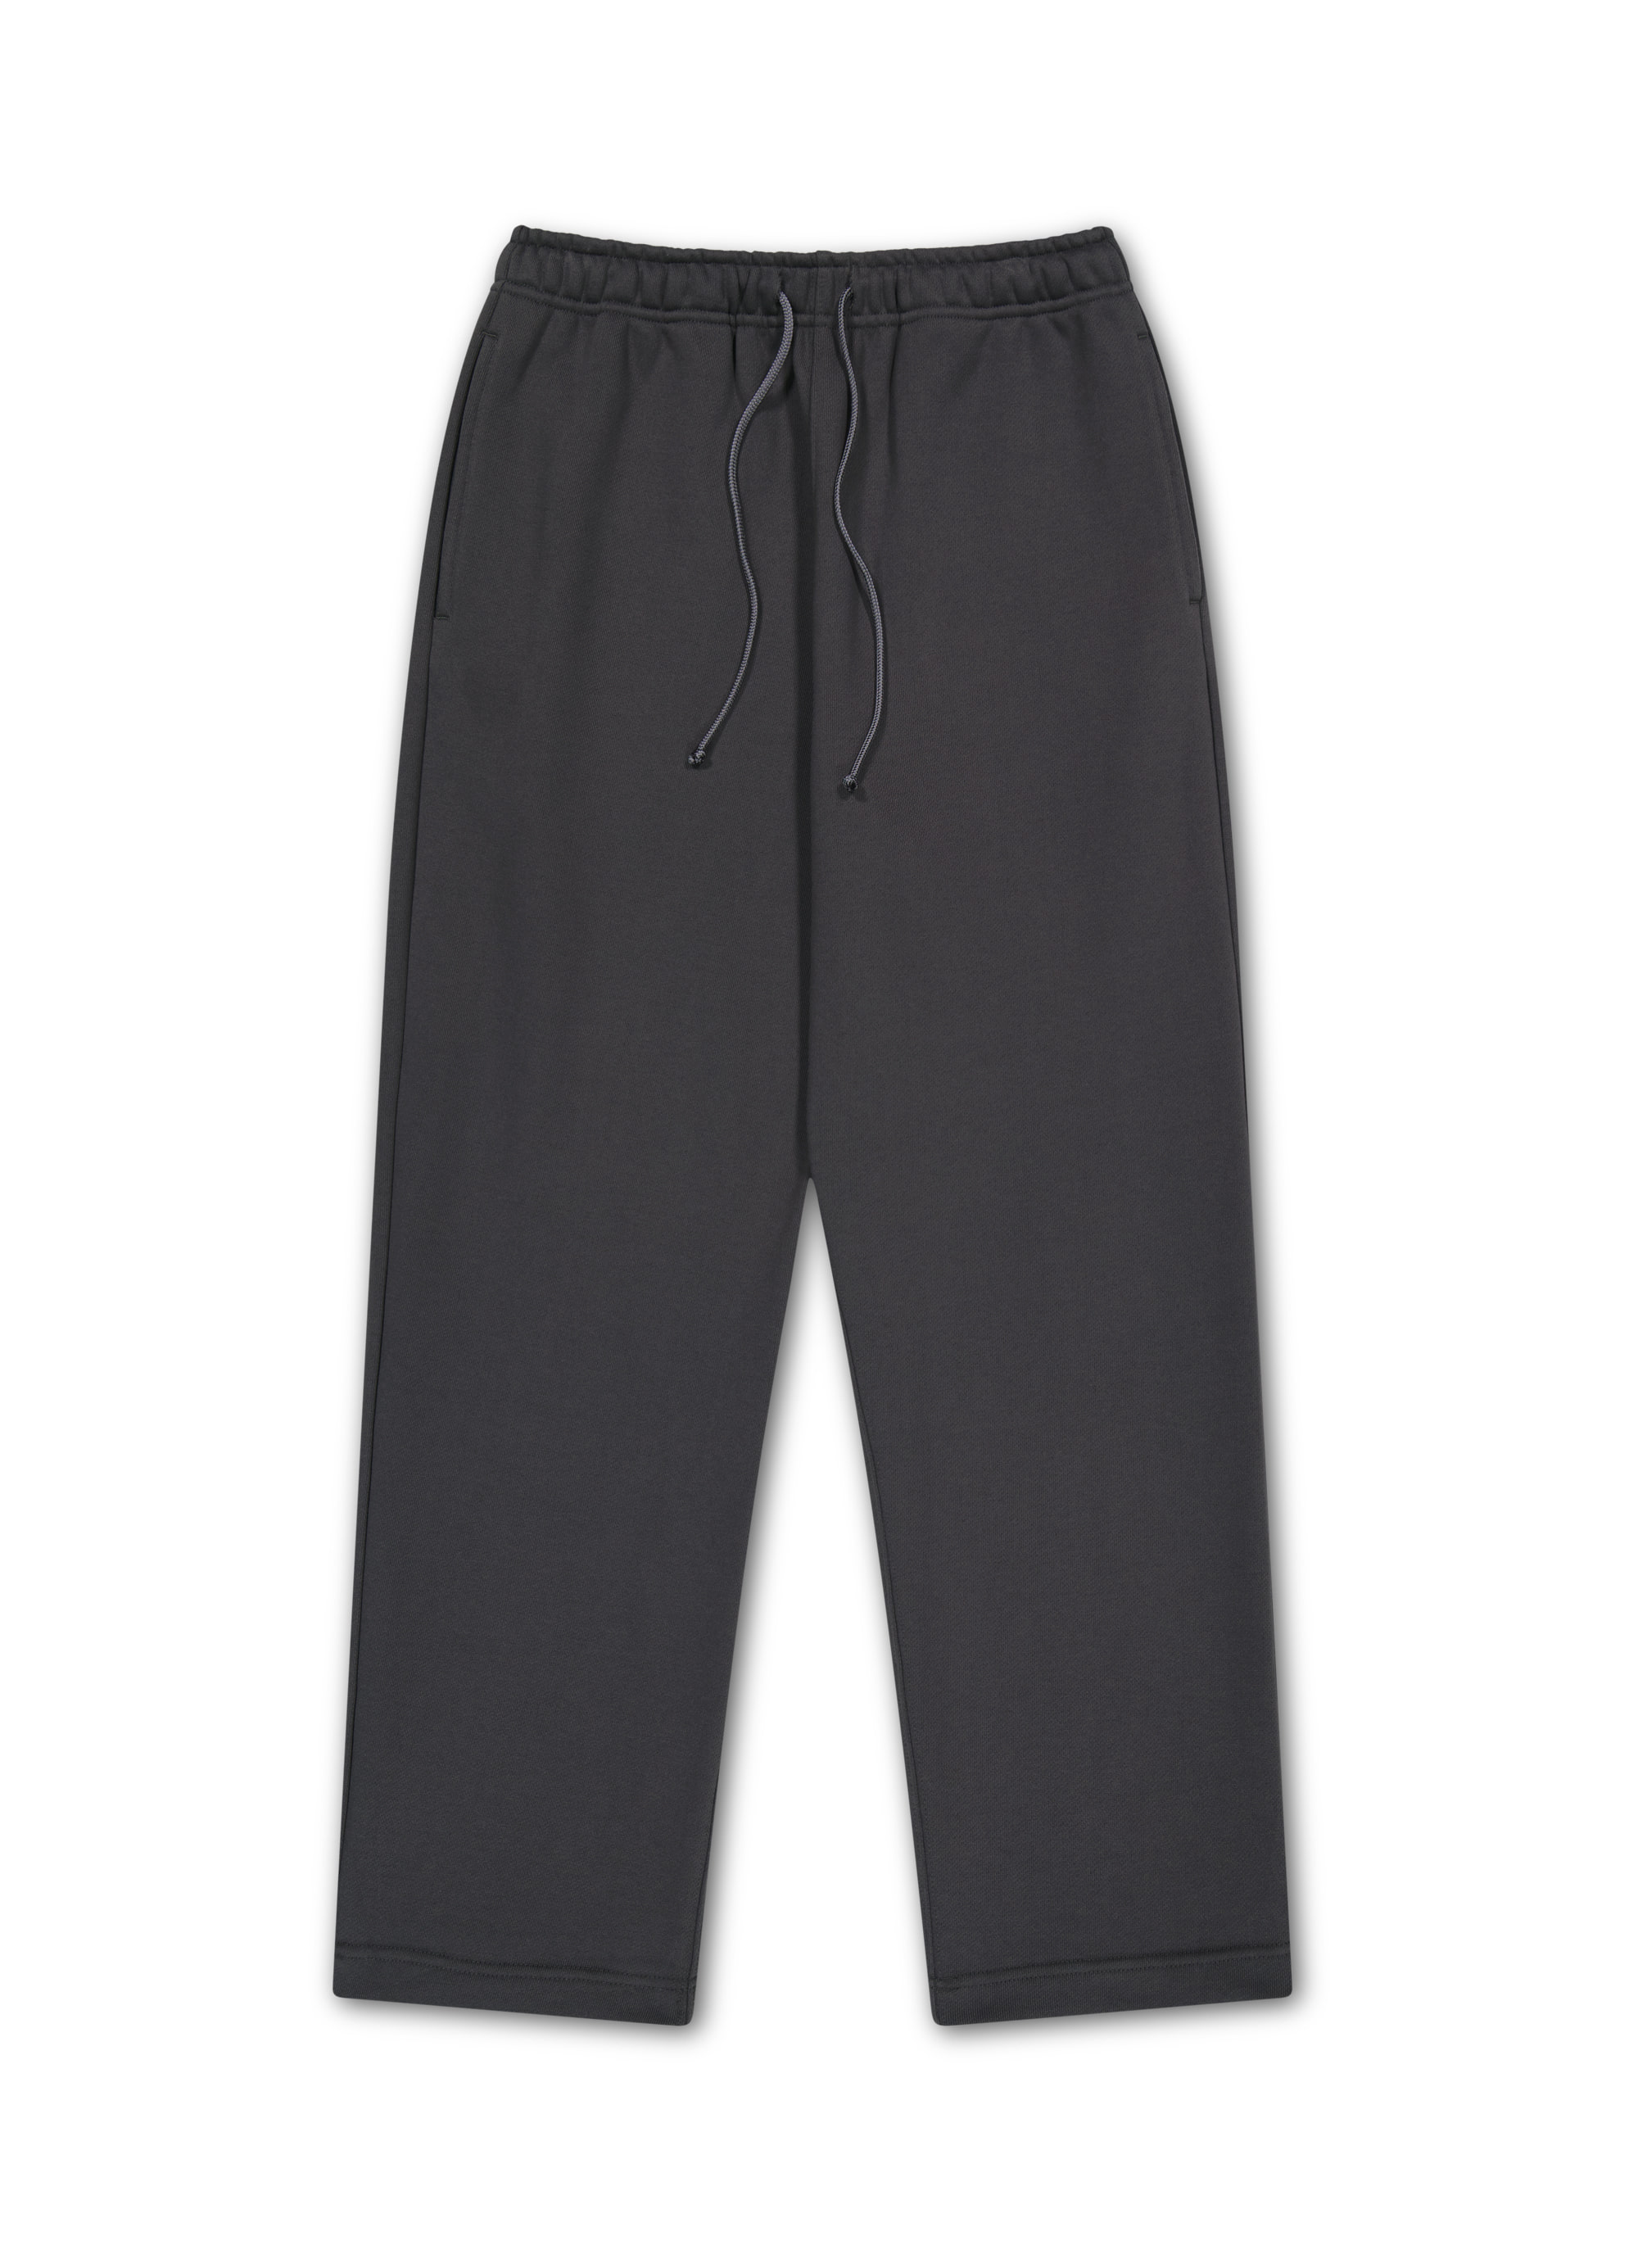 094 HEAVY WEIGHTED SWEATPANTS - CHARCOAL